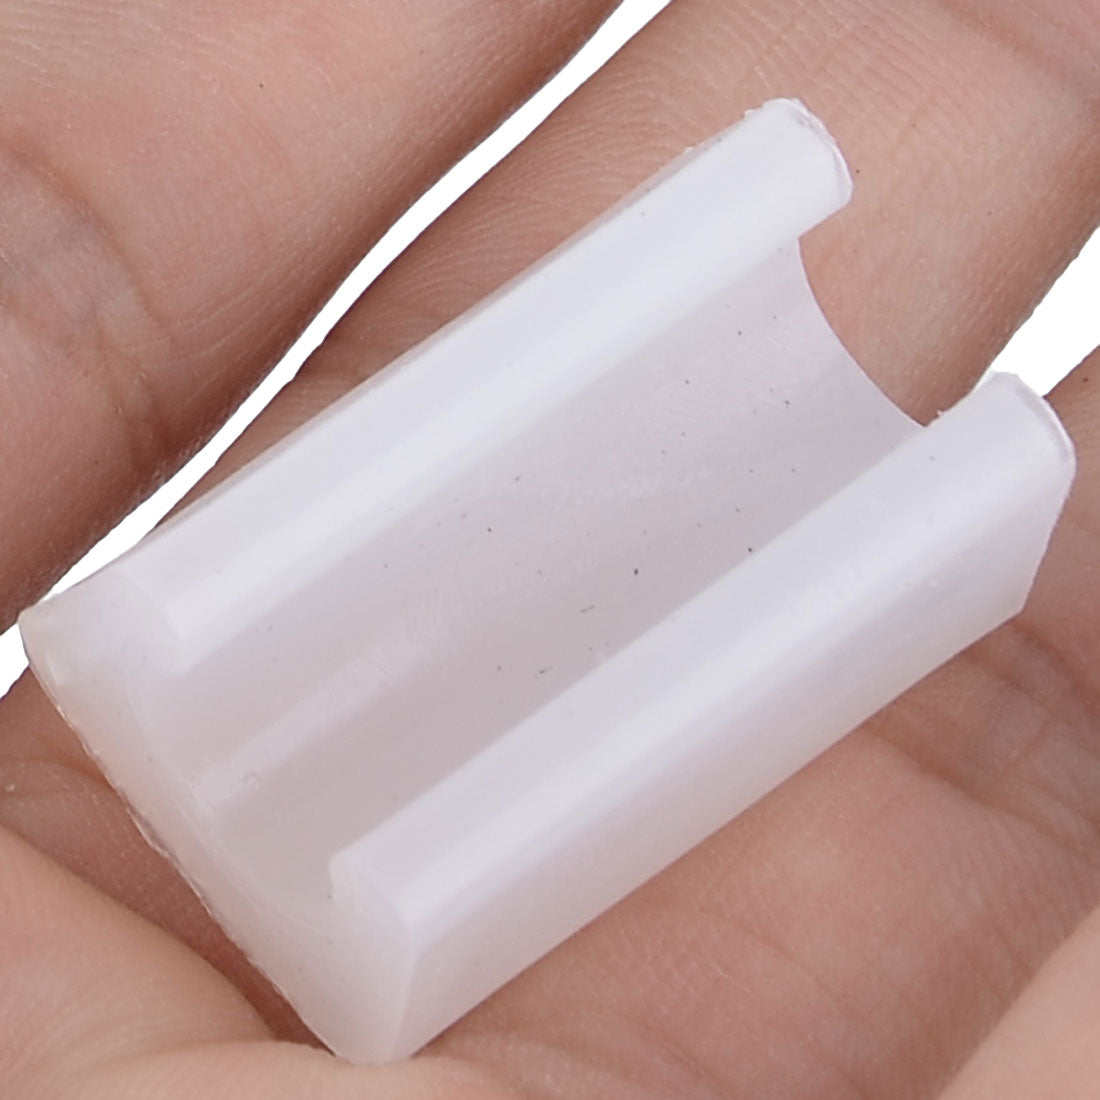 uxcell Uxcell Household Furniture Accessory Plastic Chair Leg Protector Ending Cap Tube Insert White 30pcs